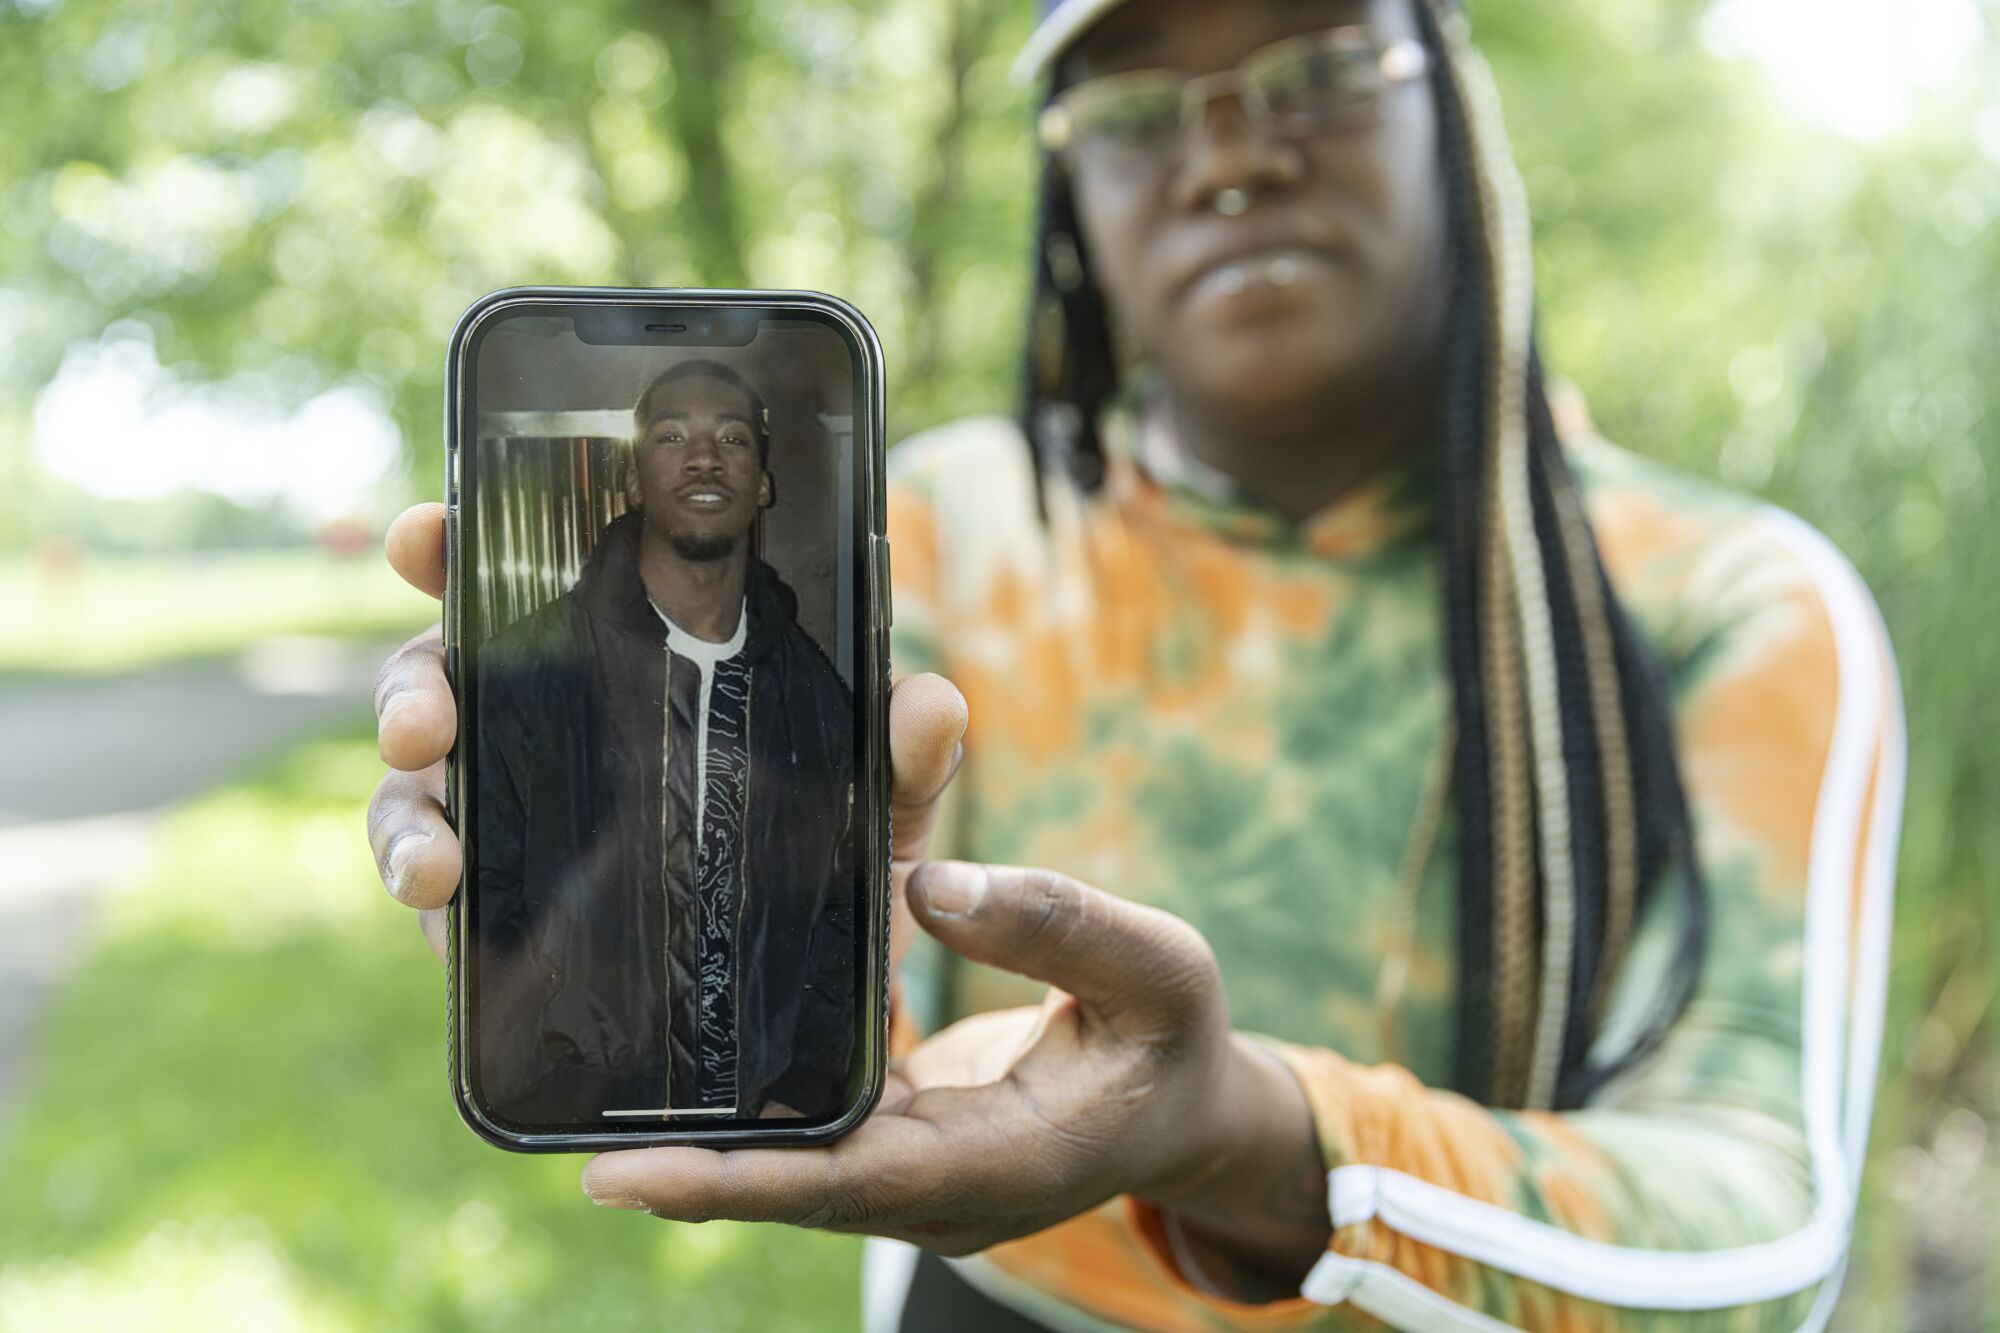 A woman holds up a phone with a photo of a man